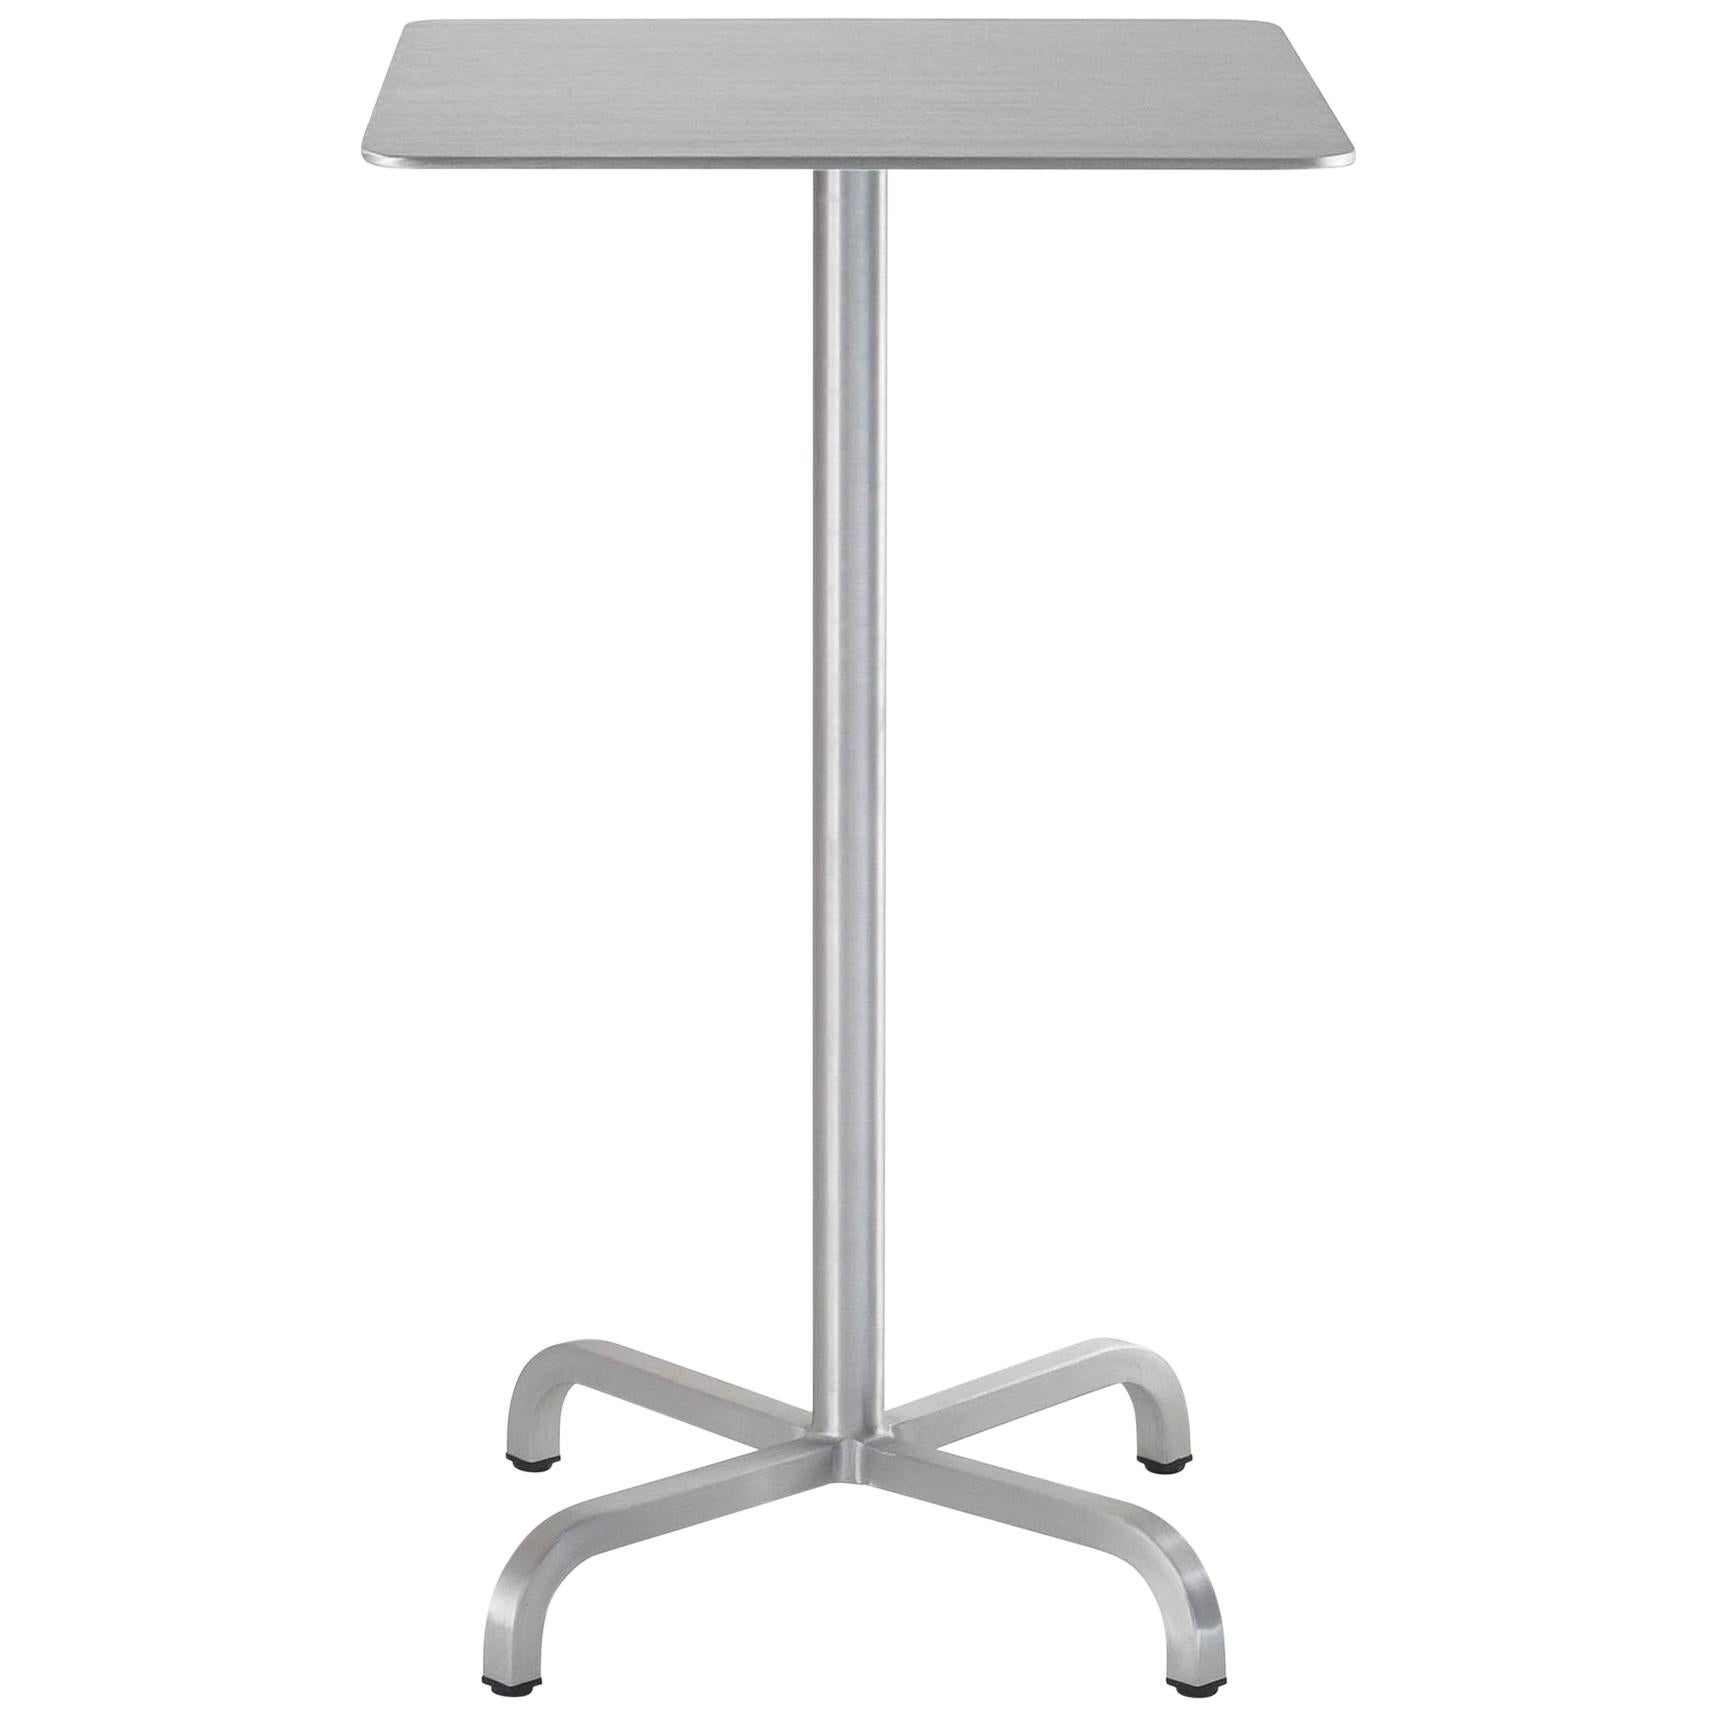 Emeco 20-06 Small Square Bar Table in Brushed Aluminum by Norman Foster 